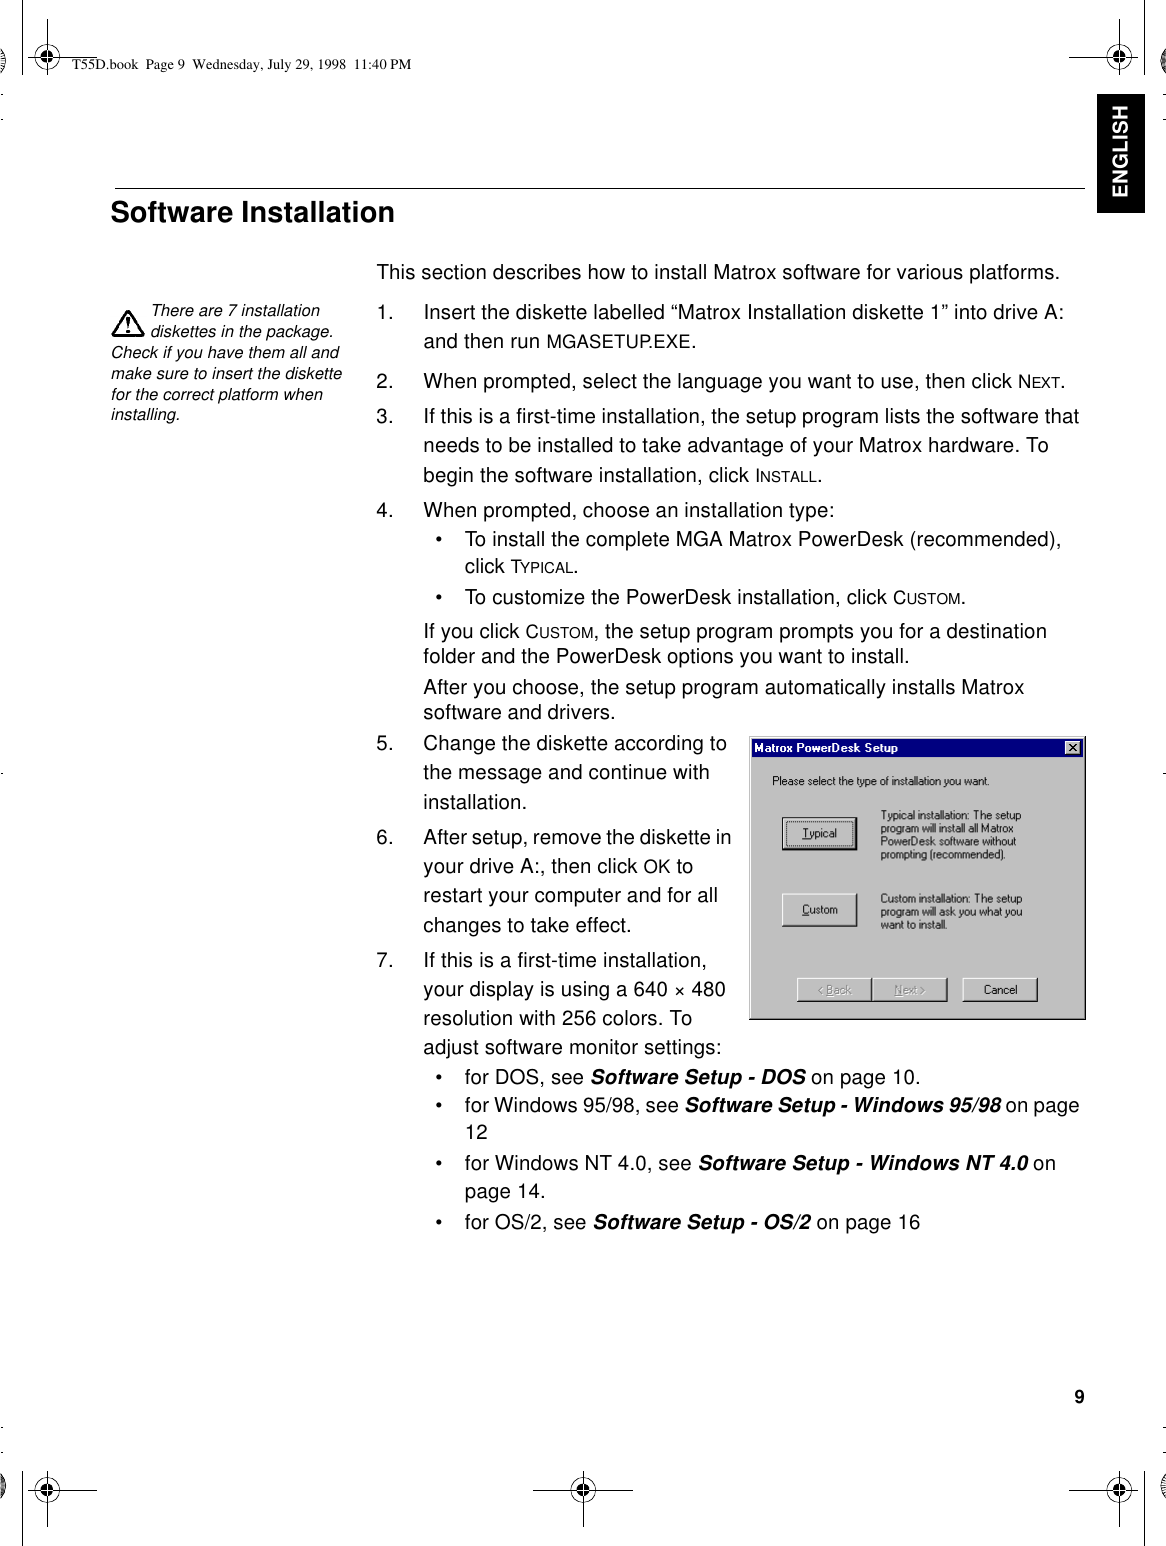 9ENGLISHSoftware InstallationThis section describes how to install Matrox software for various platforms.There are 7 installation diskettes in the package. Check if you have them all and make sure to insert the diskette for the correct platform when installing.1. Insert the diskette labelled “Matrox Installation diskette 1” into drive A: and then run MGASETUP.EXE.2. When prompted, select the language you want to use, then click NEXT.3. If this is a first-time installation, the setup program lists the software that needs to be installed to take advantage of your Matrox hardware. To begin the software installation, click INSTALL.4. When prompted, choose an installation type:•To install the complete MGA Matrox PowerDesk (recommended), click TYPICAL.•To customize the PowerDesk installation, click CUSTOM.If you click CUSTOM, the setup program prompts you for a destination folder and the PowerDesk options you want to install.After you choose, the setup program automatically installs Matrox software and drivers.5. Change the diskette according to the message and continue with installation. 6. After setup, remove the diskette in your drive A:, then click OK to restart your computer and for all changes to take effect.7. If this is a first-time installation, your display is using a 640 × 480 resolution with 256 colors. To adjust software monitor settings:•for DOS, see Software Setup - DOS on page 10.•for Windows 95/98, see Software Setup - Windows 95/98 on page 12•for Windows NT 4.0, see Software Setup - Windows NT 4.0 on page 14.•for OS/2, see Software Setup - OS/2 on page 16T55D.book  Page 9  Wednesday, July 29, 1998  11:40 PM